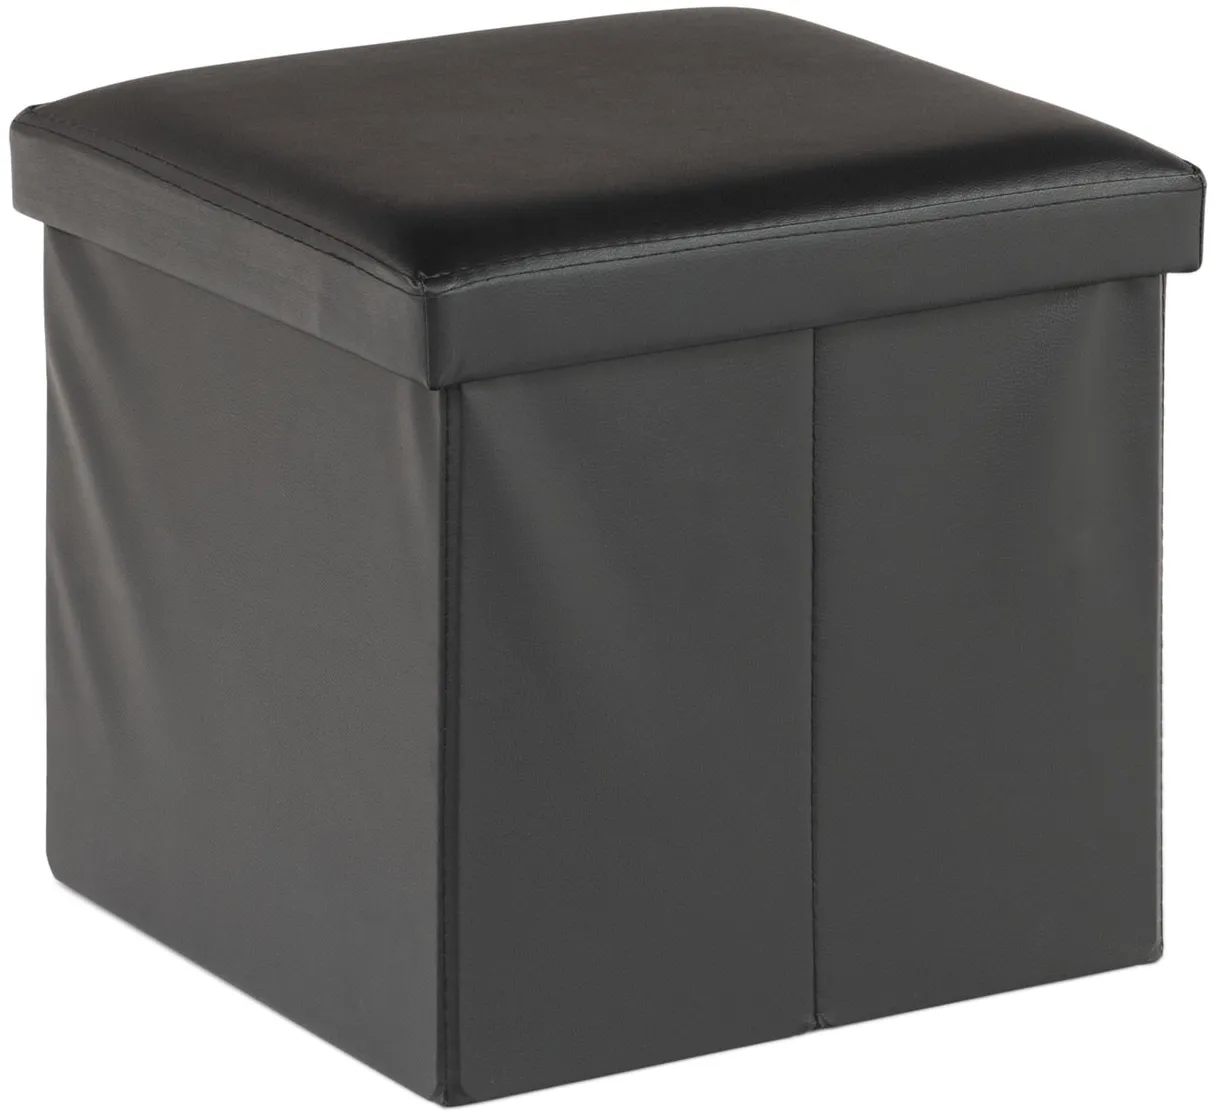 Lucy Foldable Ottoman